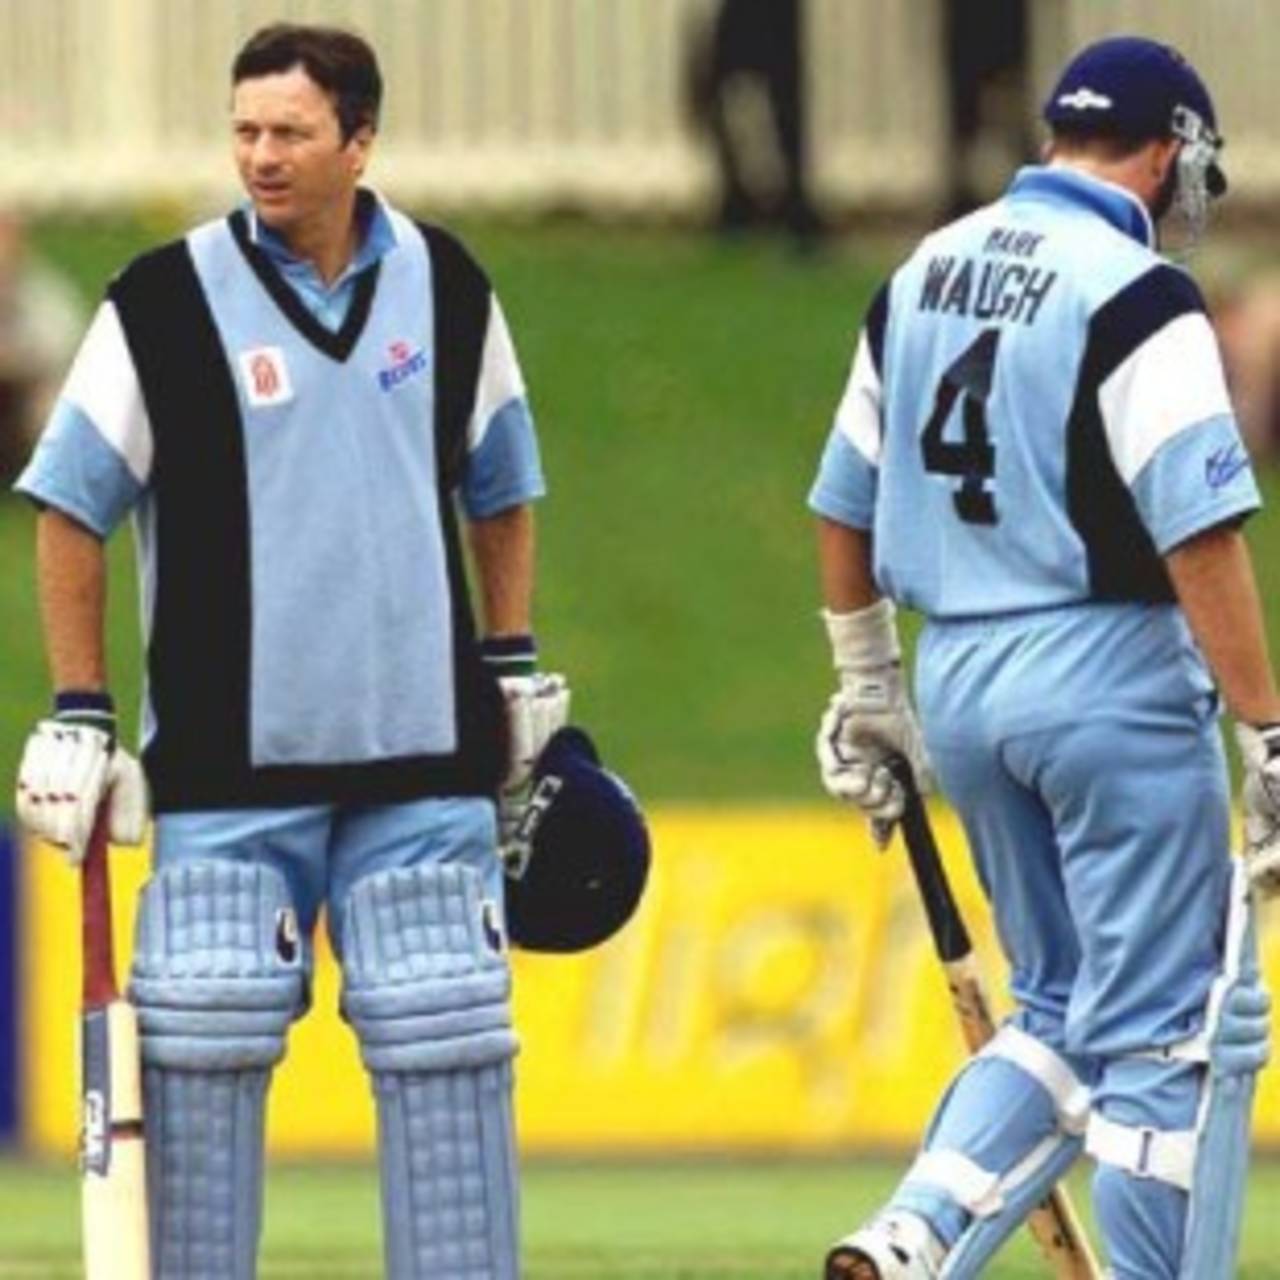 11 Nov 2000: Steve Waugh and Mark Waugh both from New South Wales discuss tacktics during the Mercantile Mutual Cup Cricket match between Tasmania and New South Wales at Bellerive Oval in Hobart, Australia.